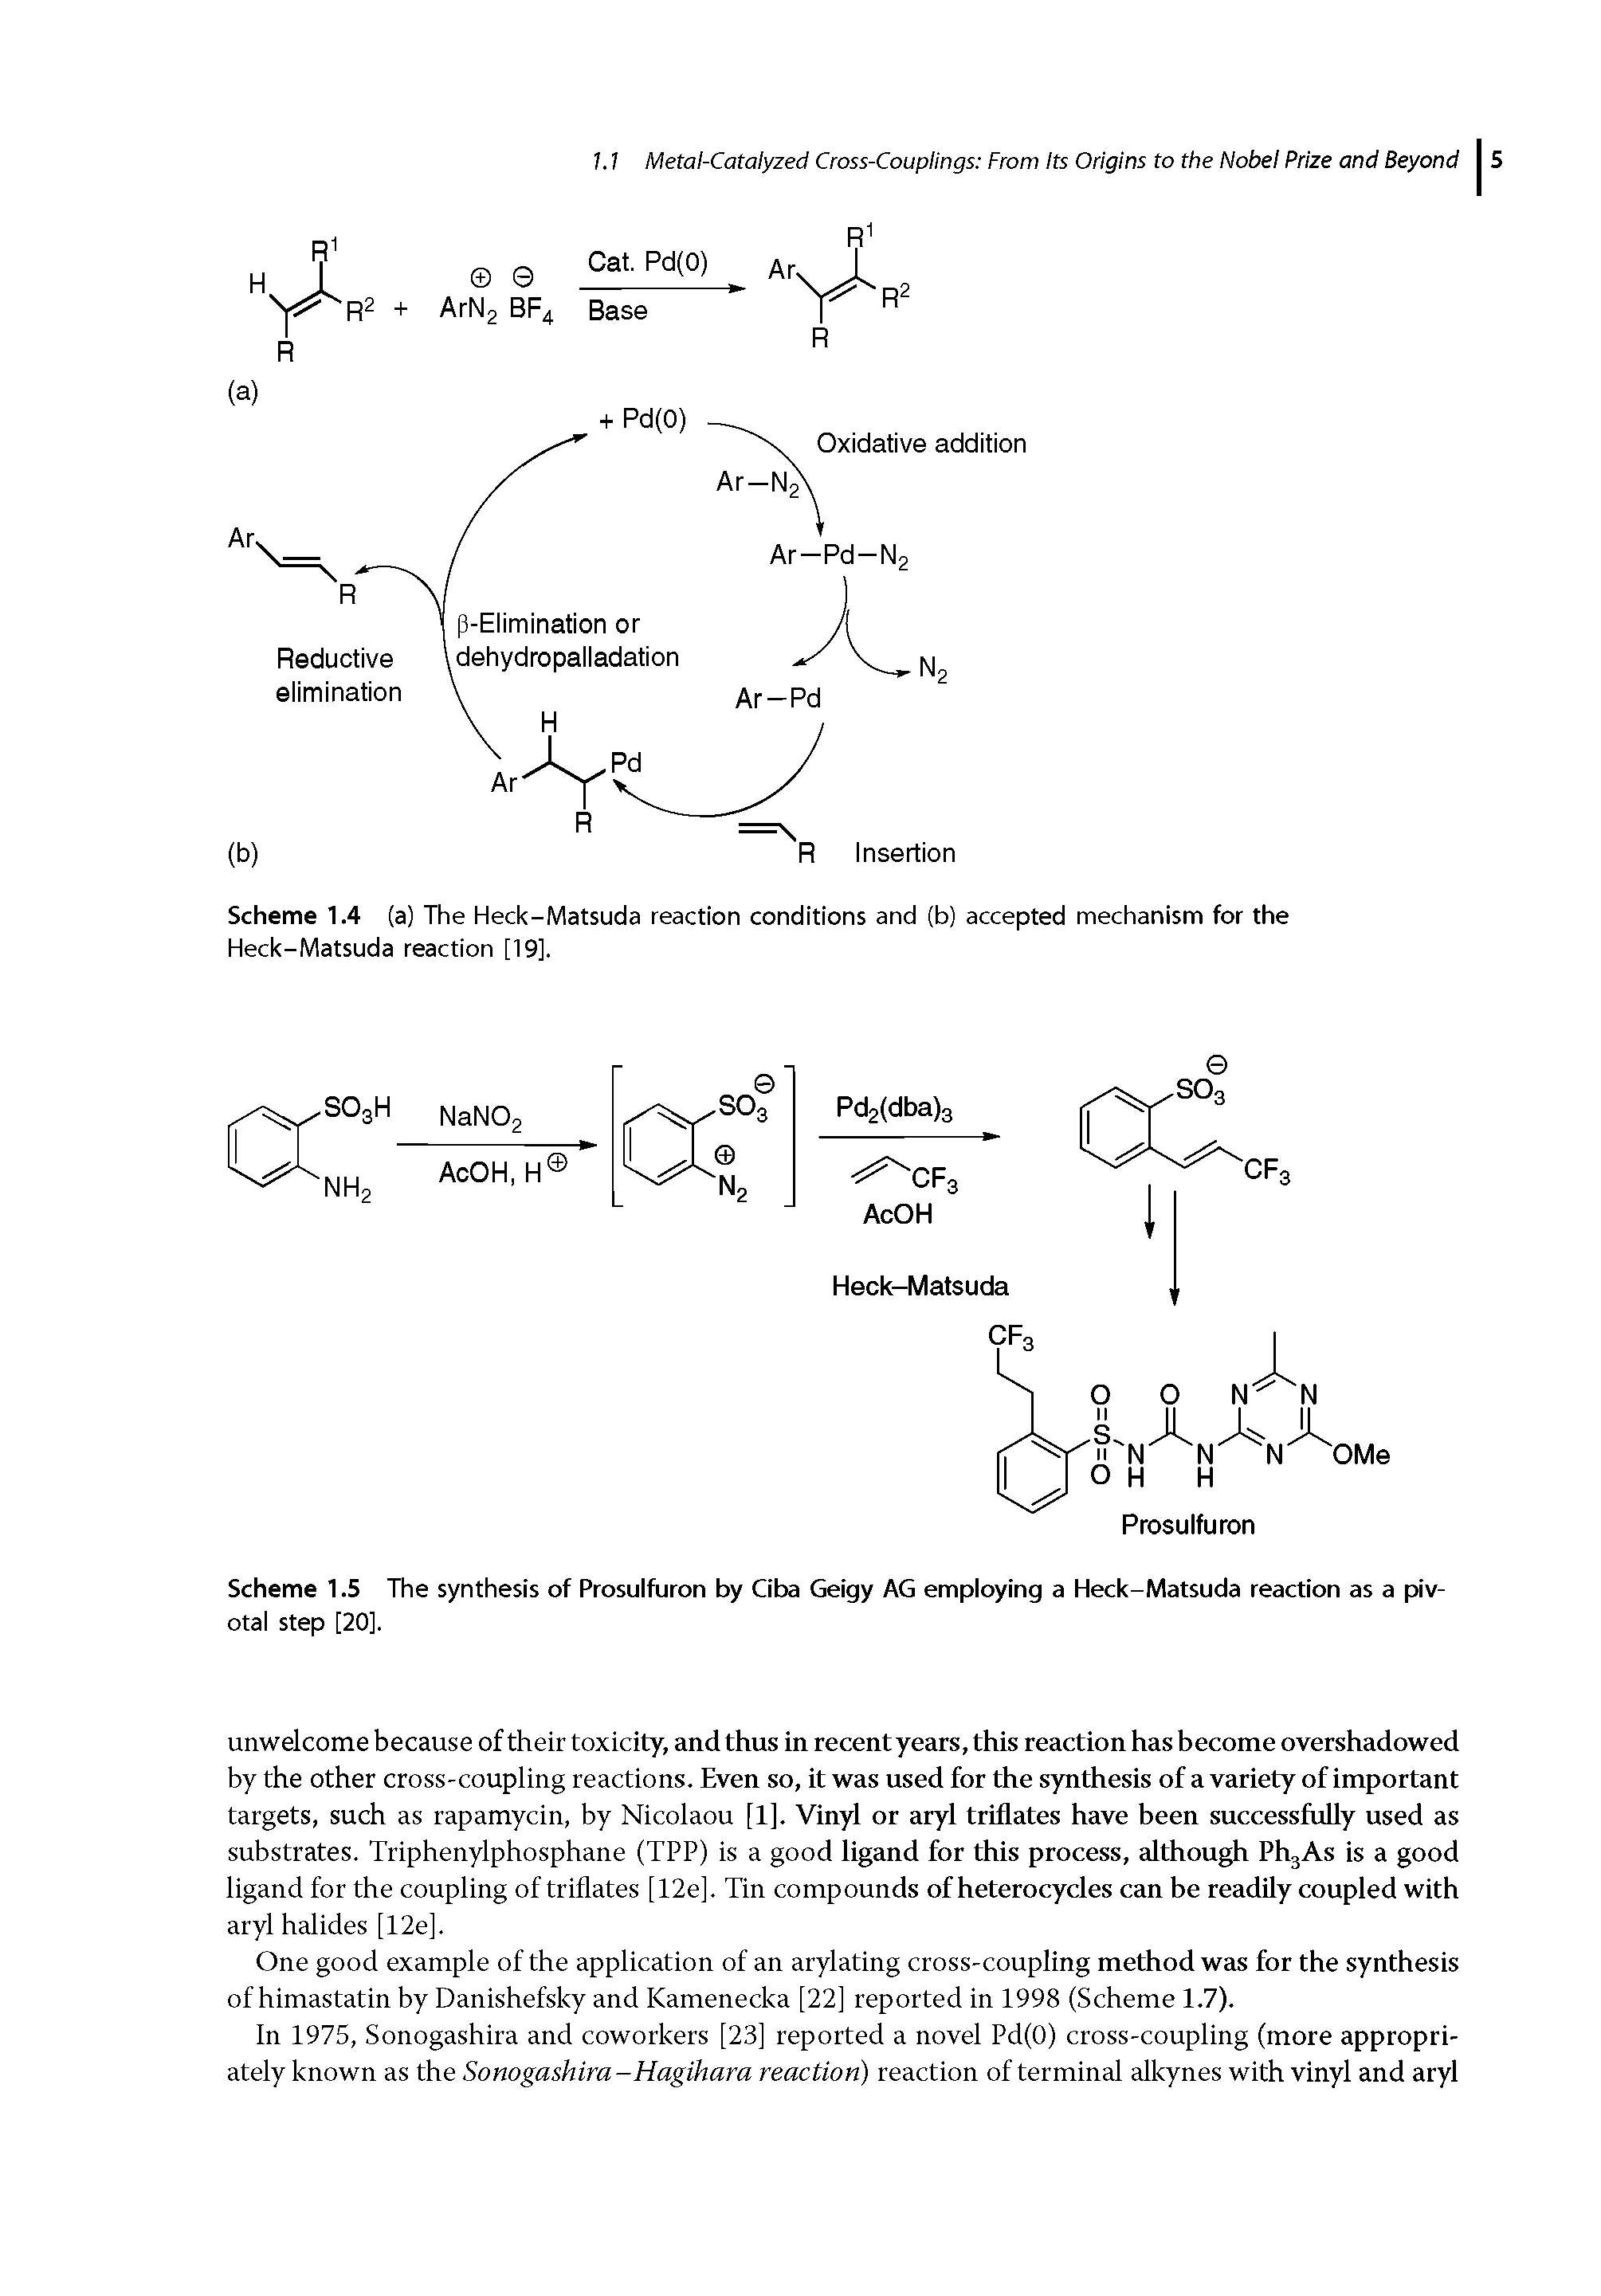 Scheme 1.5 The synthesis of Prosulfuron by Ciba Geigy AG employing a Heck-Matsuda reaction as a pivotal step [20].